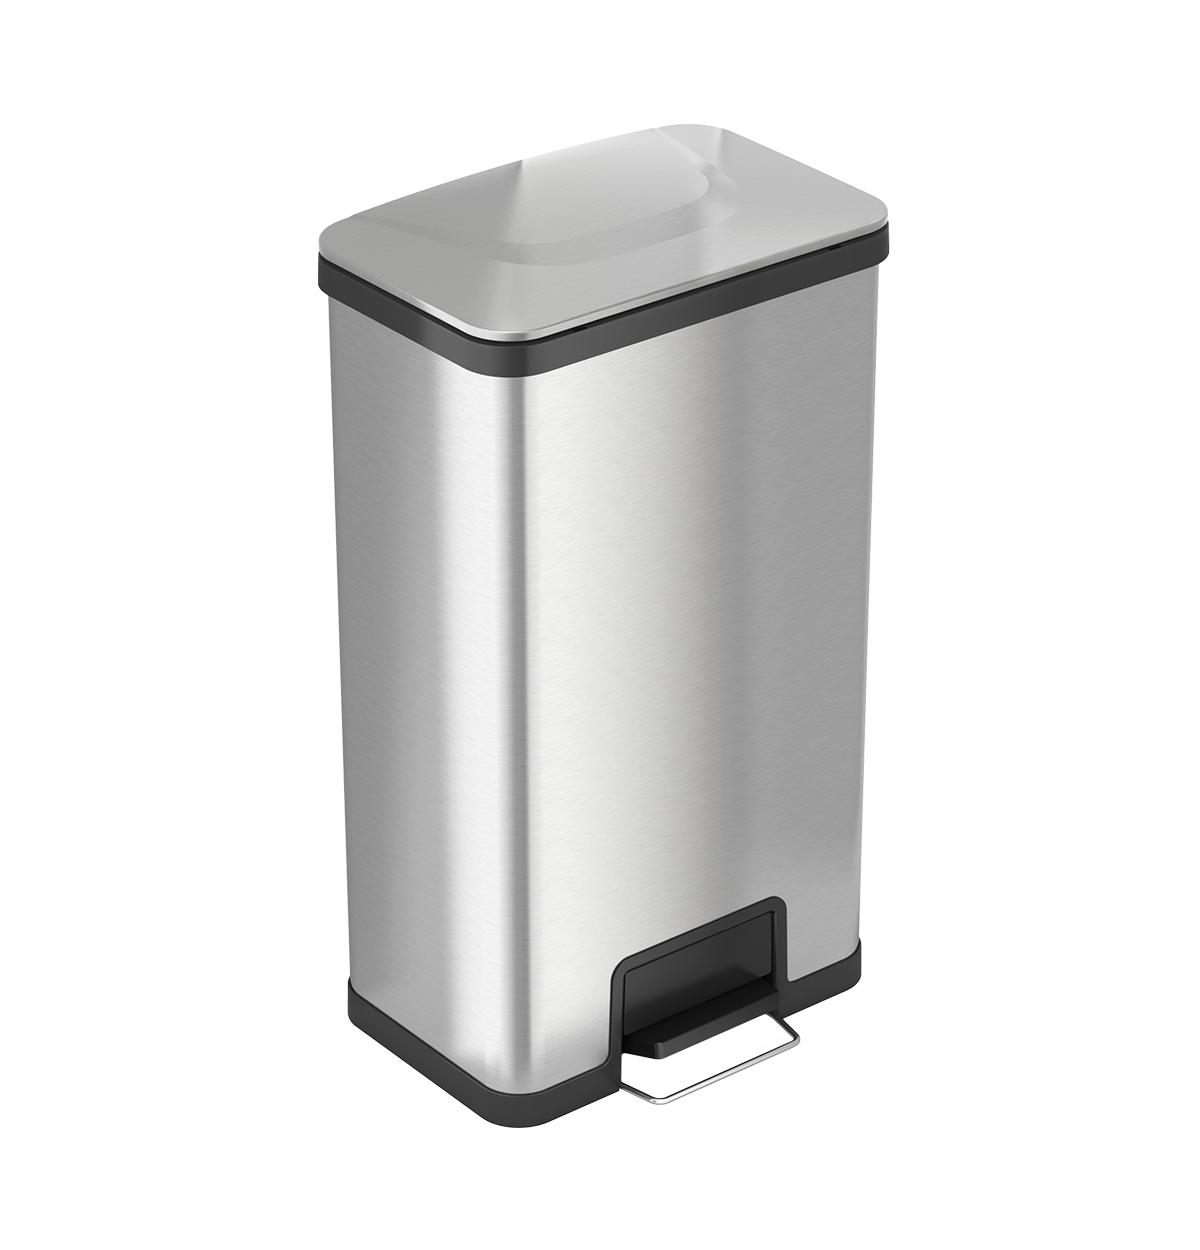 iTouchless AirStep 18 Gallon Step Trash Can with Deodorizer, Stainless Steel - Silver